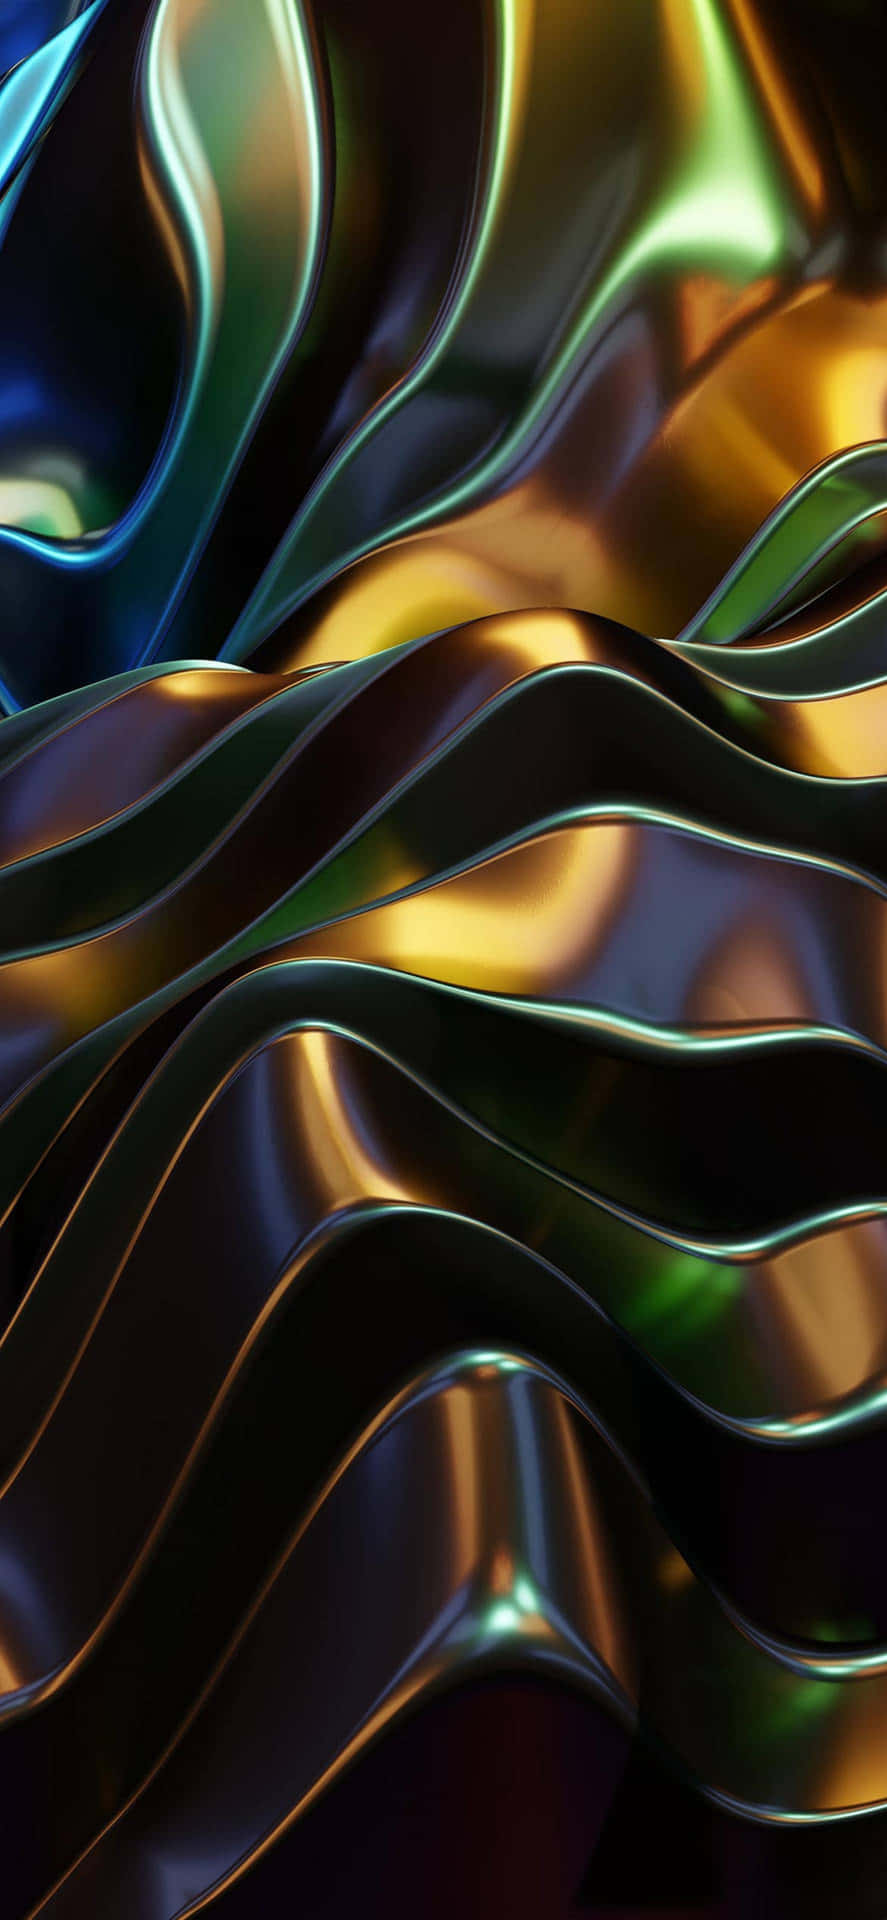 A Colorful Abstract Background With Shiny Metal